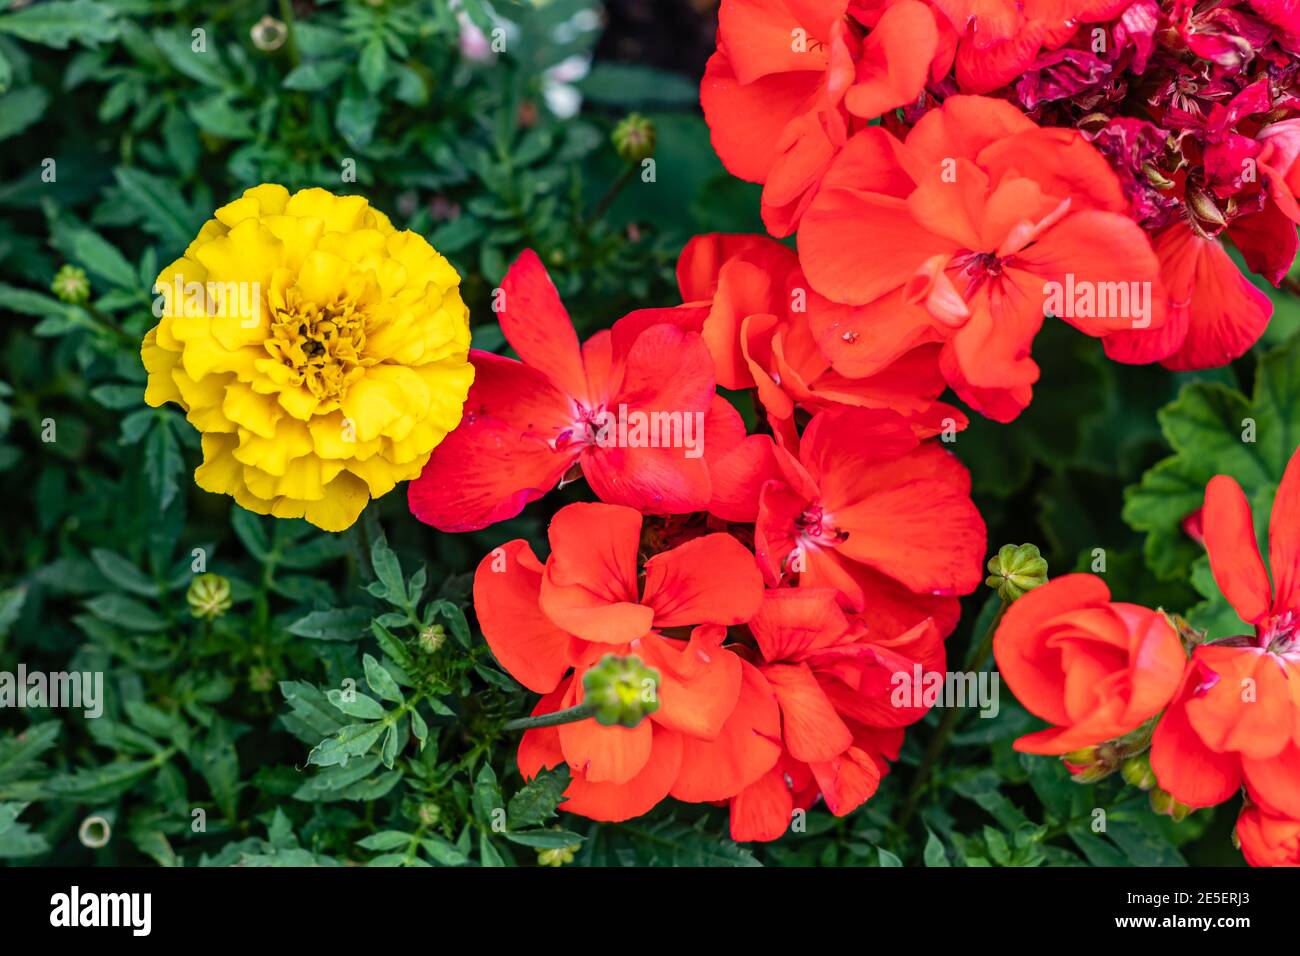 Domination dynamic - a lone yellow or bunch of red flowers? Stock Photo